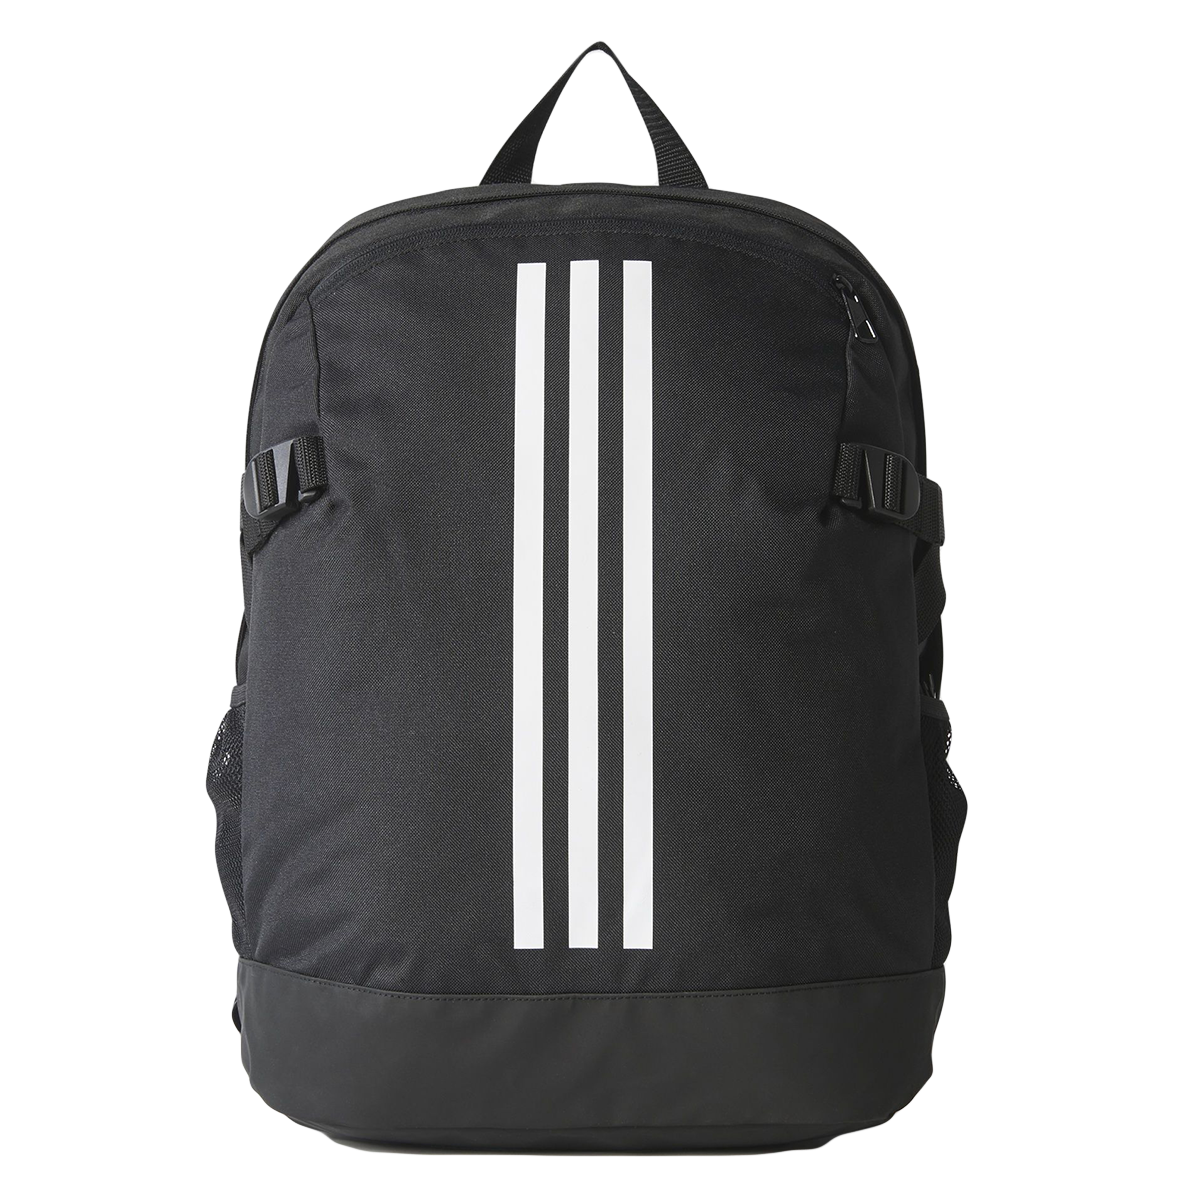 Adidas 3stripes Power Backpack Bag Clipart